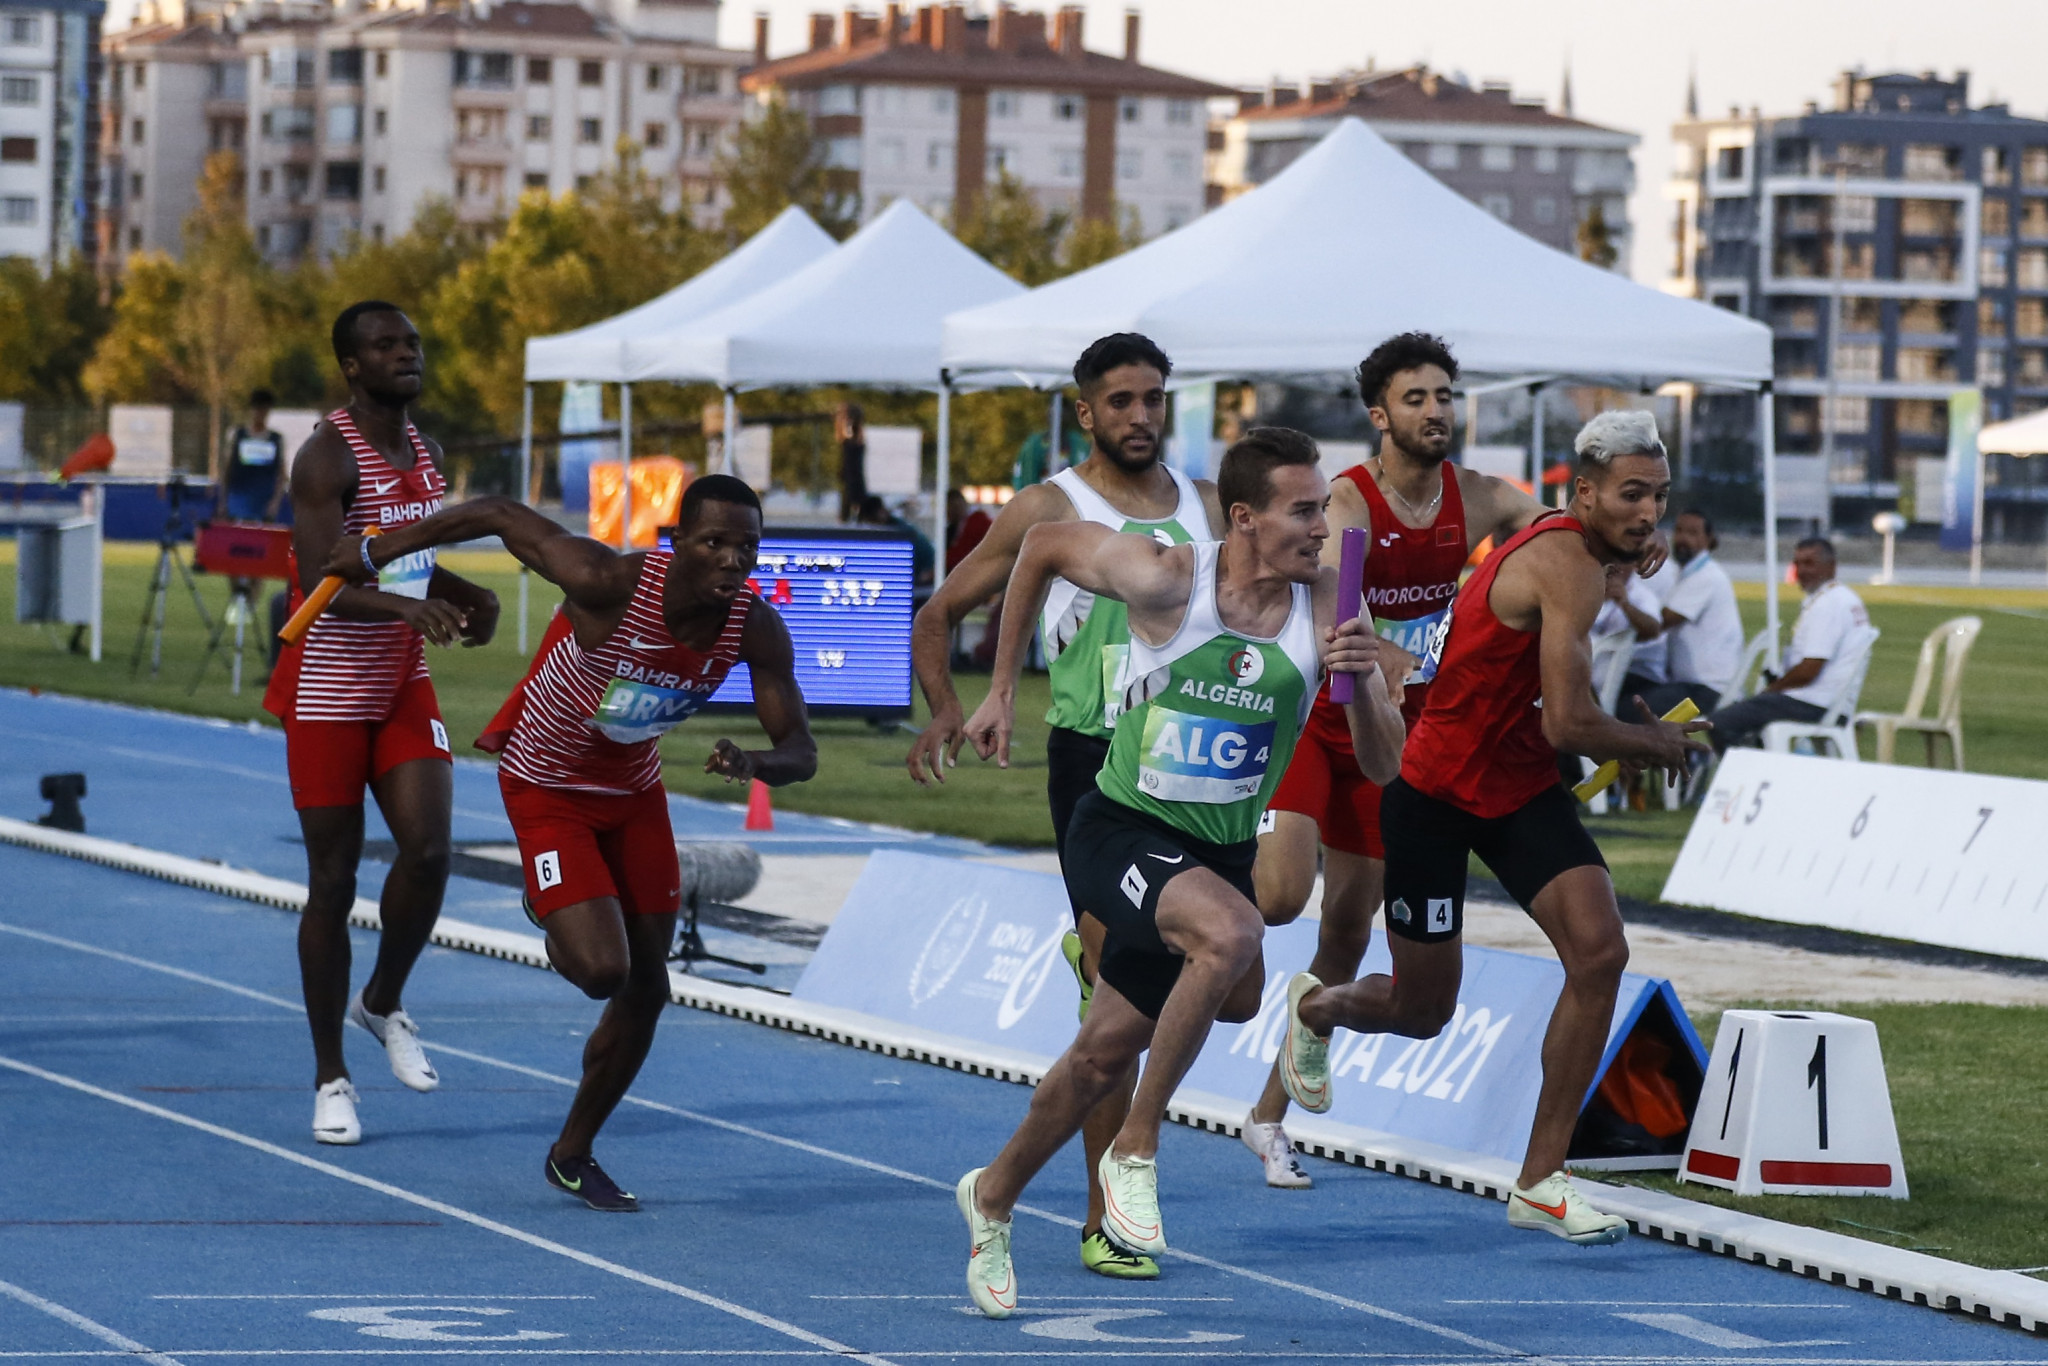 Relay races took centre stage at the Konya Athletic Field ©Konya 2021